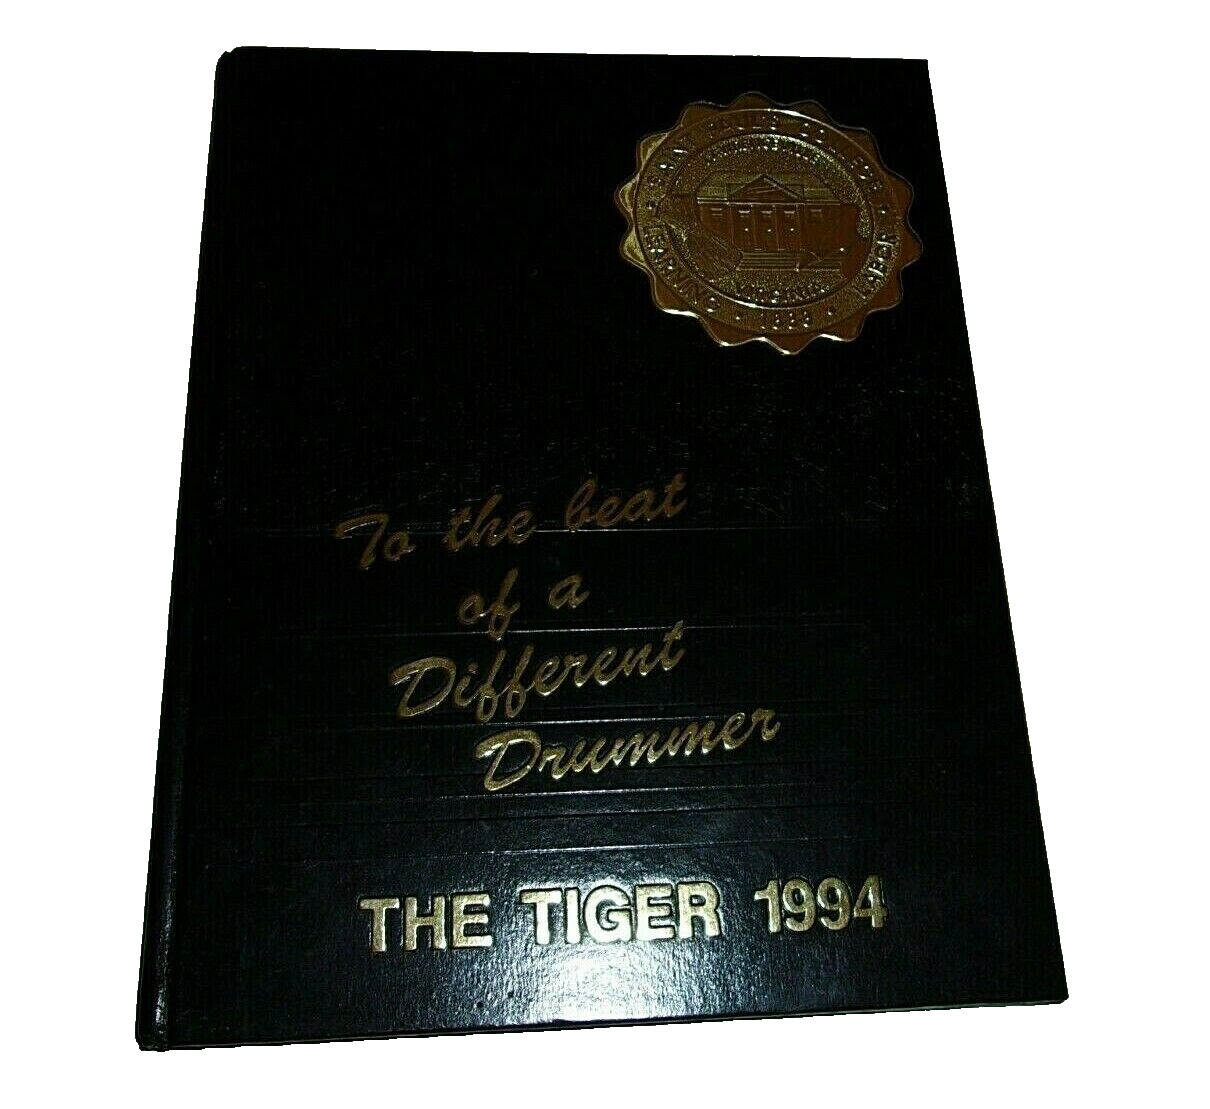 SAINT PAUL'S THE TIGER LAWRENCEVILLE, VIRGINIA Yearbook / College CLASS OF 1994